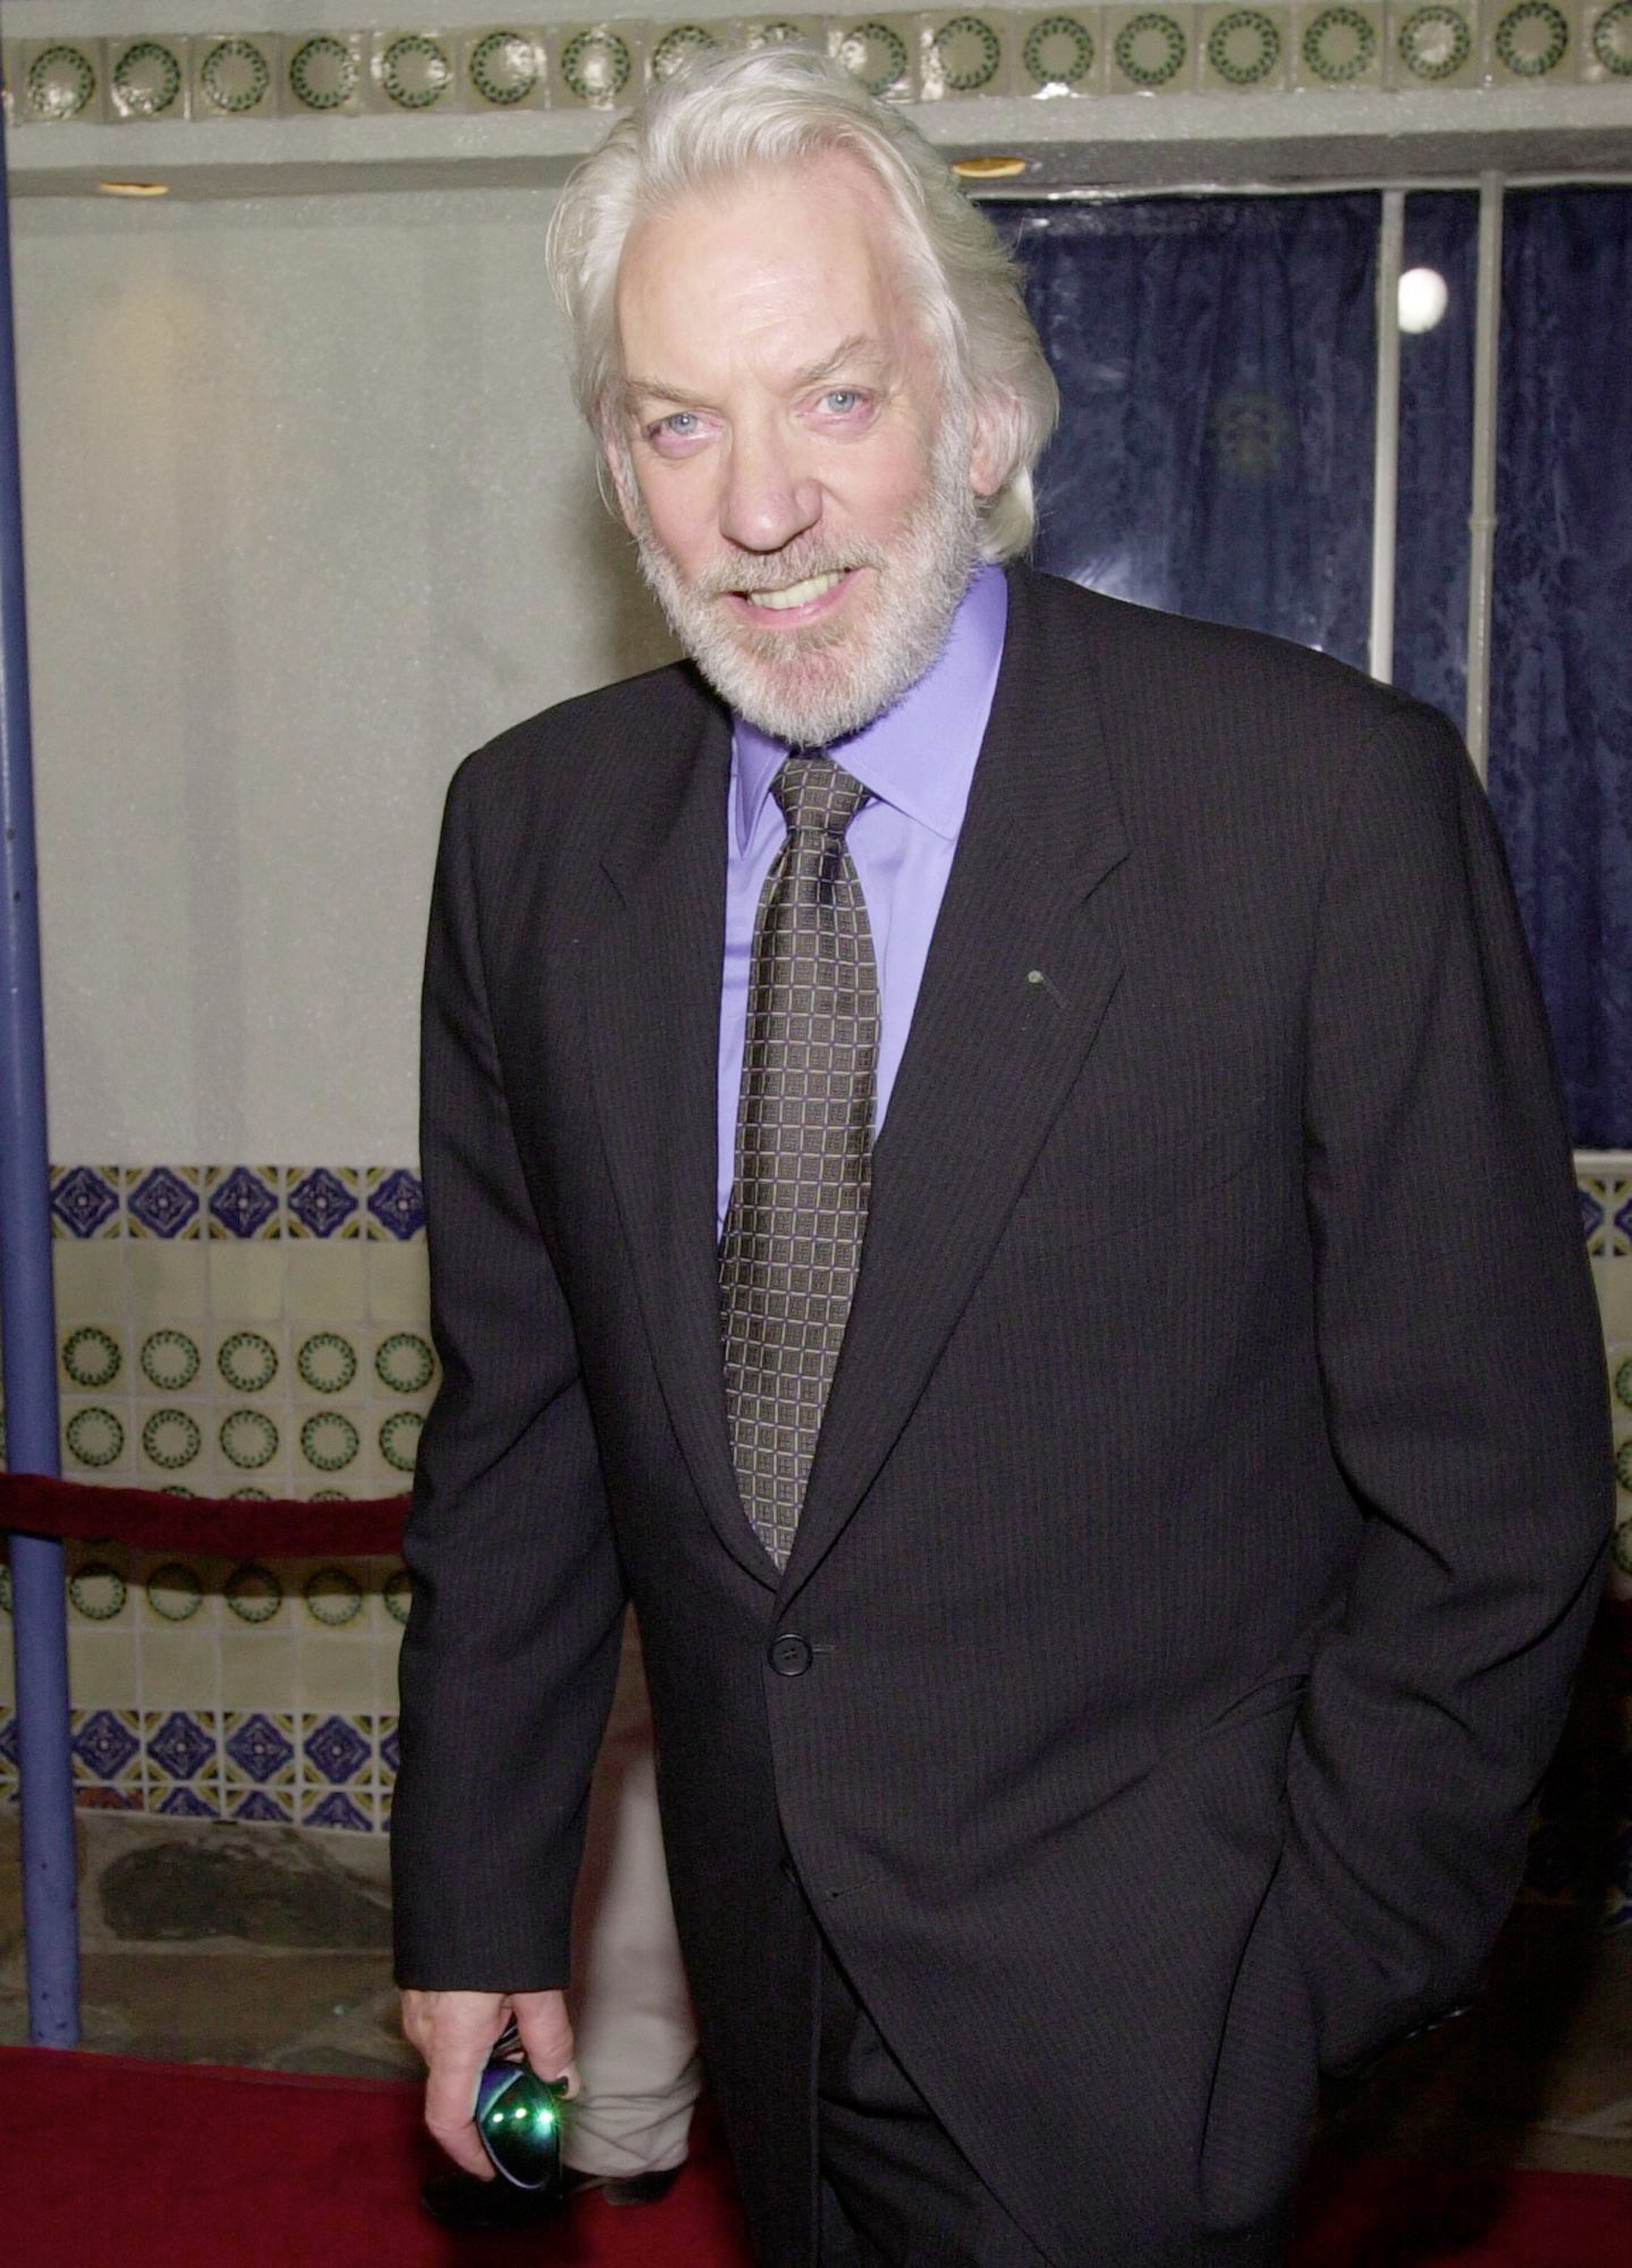 Donald Sutherland at the premiere of "Space Cowboys" on Aug. 1, 2000 in Westwood, California | Photo: Getty Images